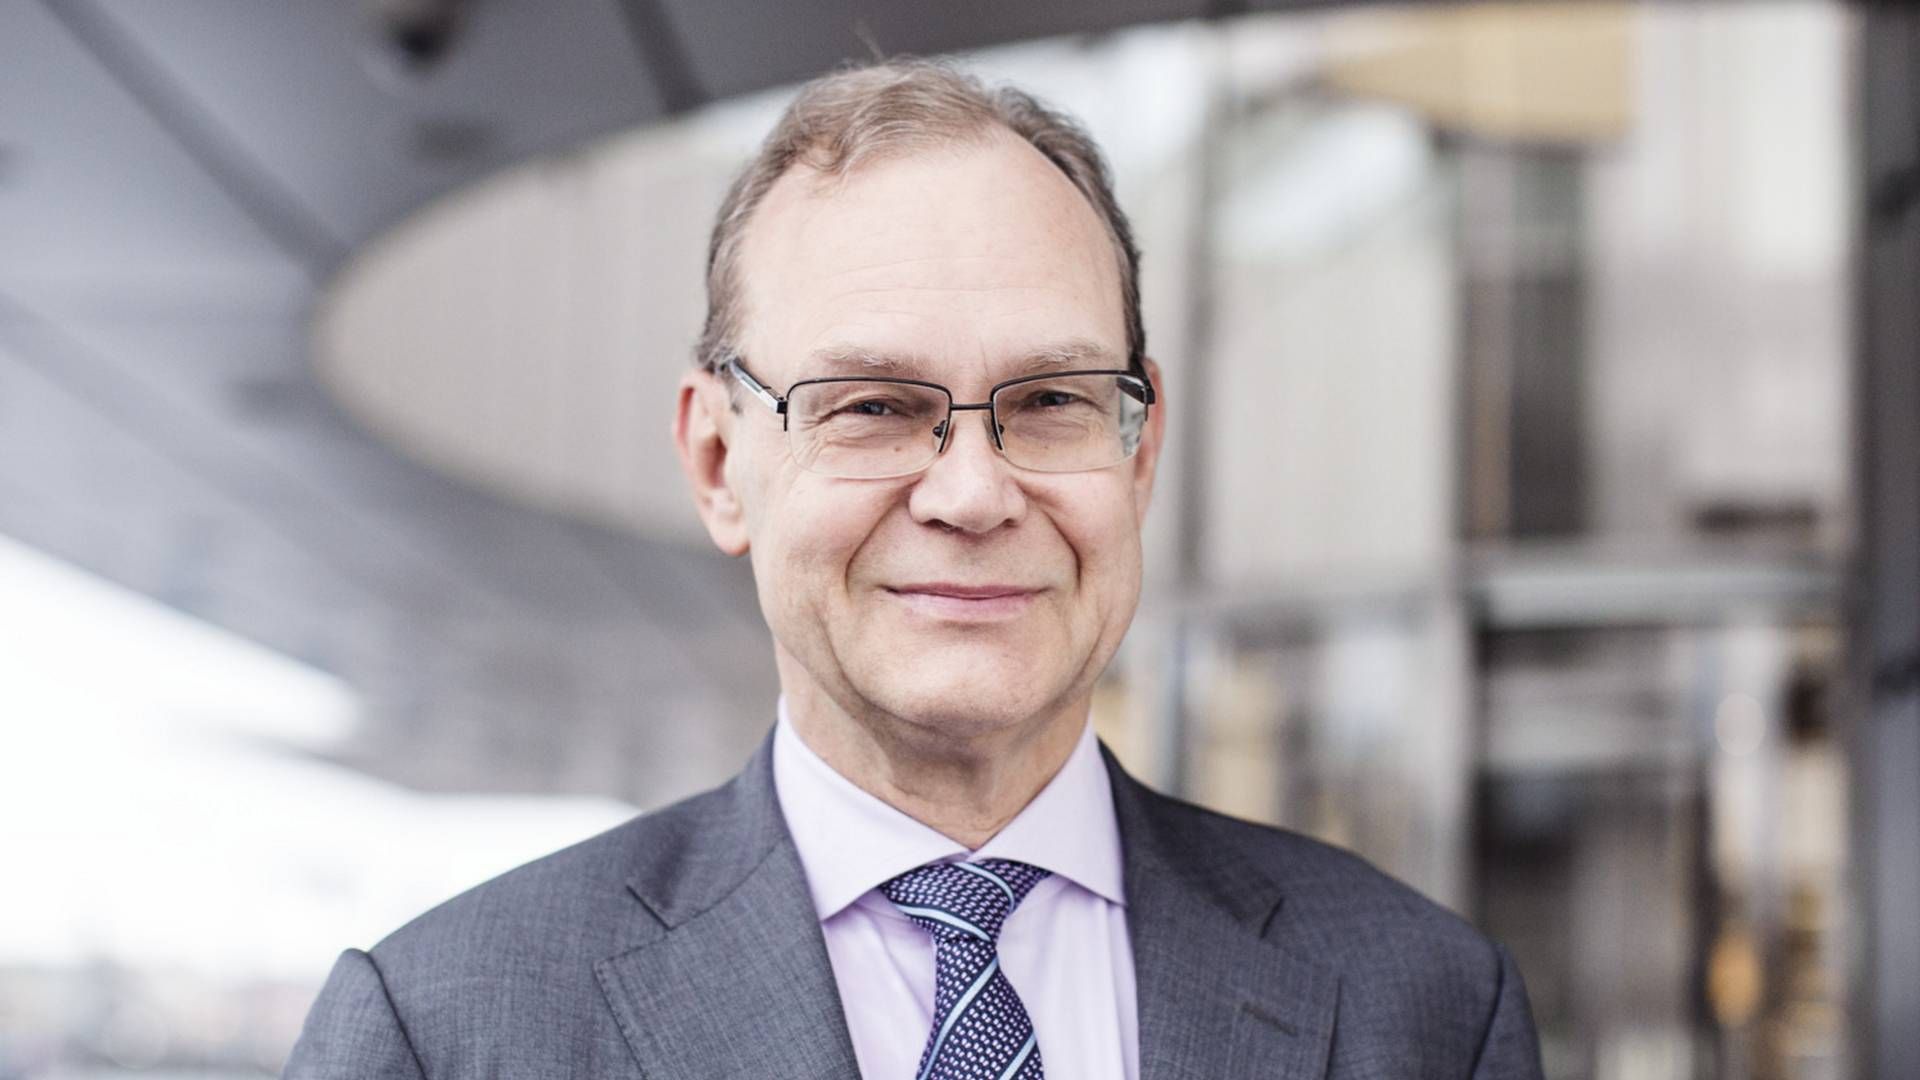 Hans Sterte, Chief Investment Officer at Alecta. | Photo: Alecta/PR